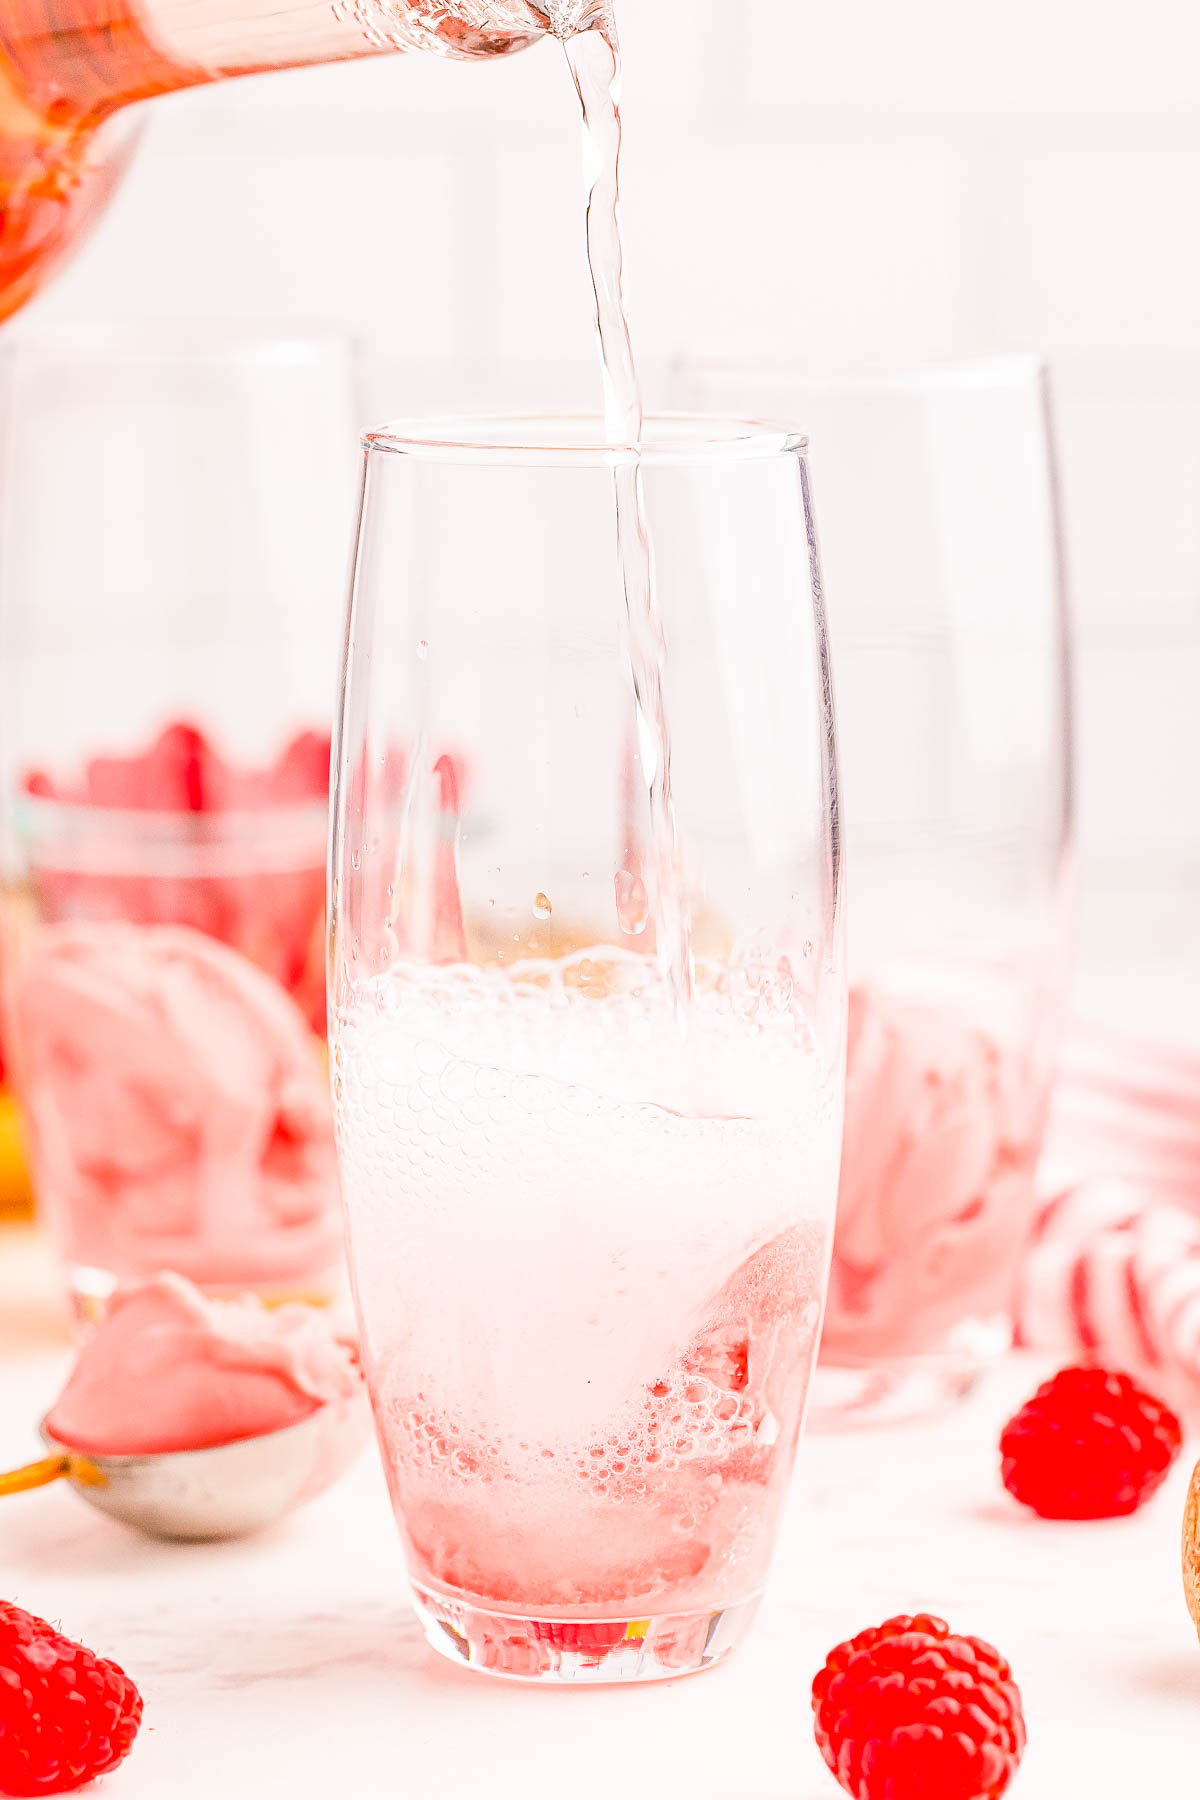 A close-up of a drink being poured into a glass containing a scoop of raspberry sorbet. Other similar glasses with sorbet and fresh raspberries are in the background.